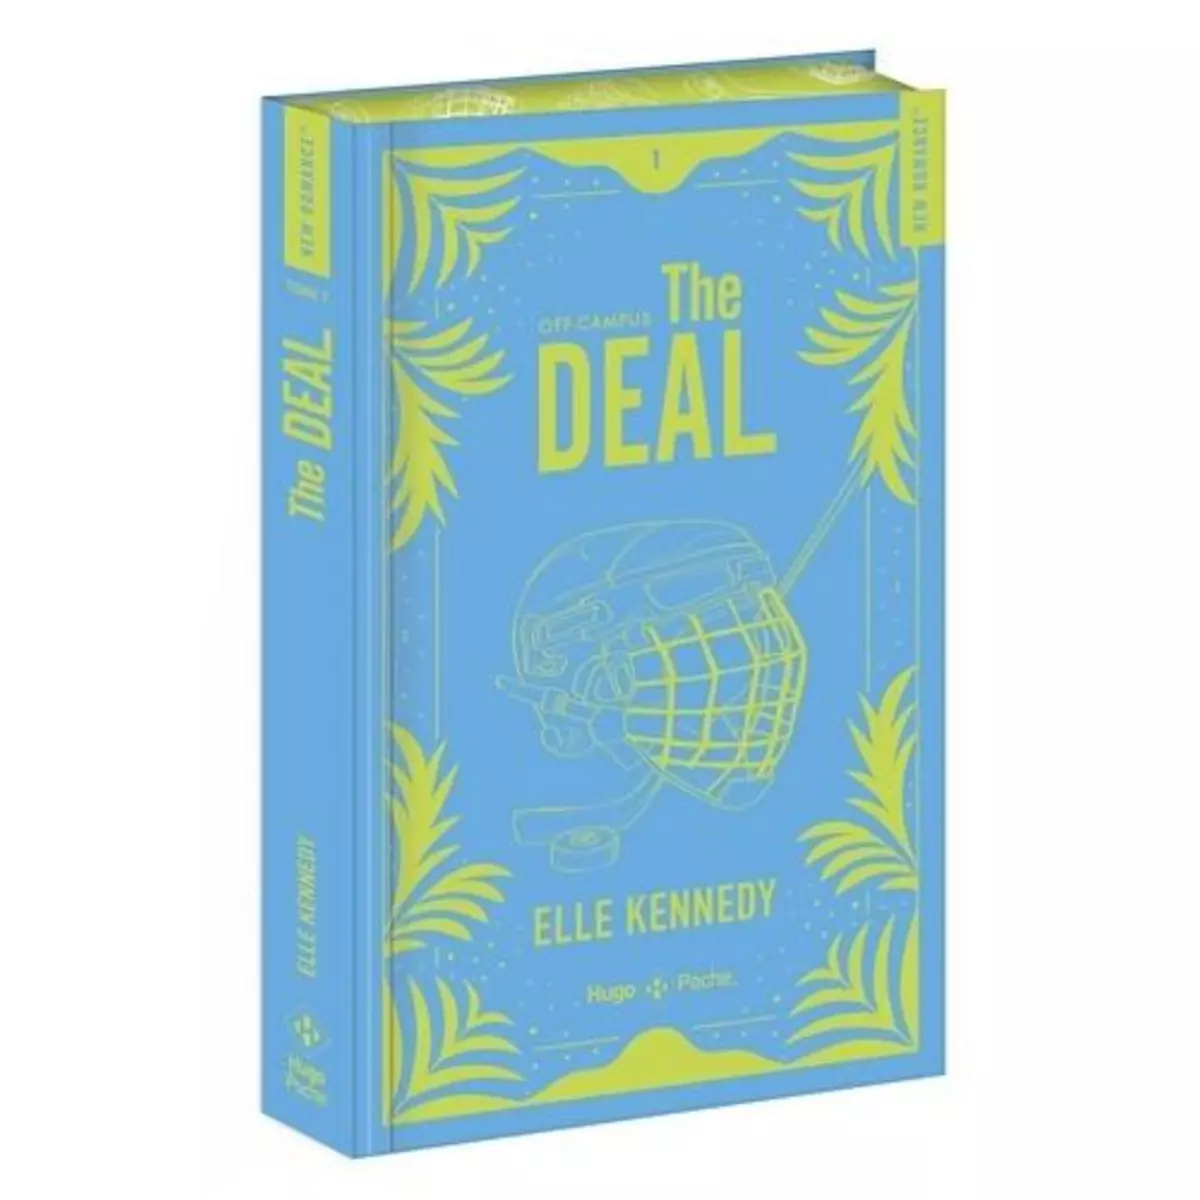  OFF-CAMPUS TOME 1 : THE DEAL. EDITION COLLECTOR, Kennedy Elle